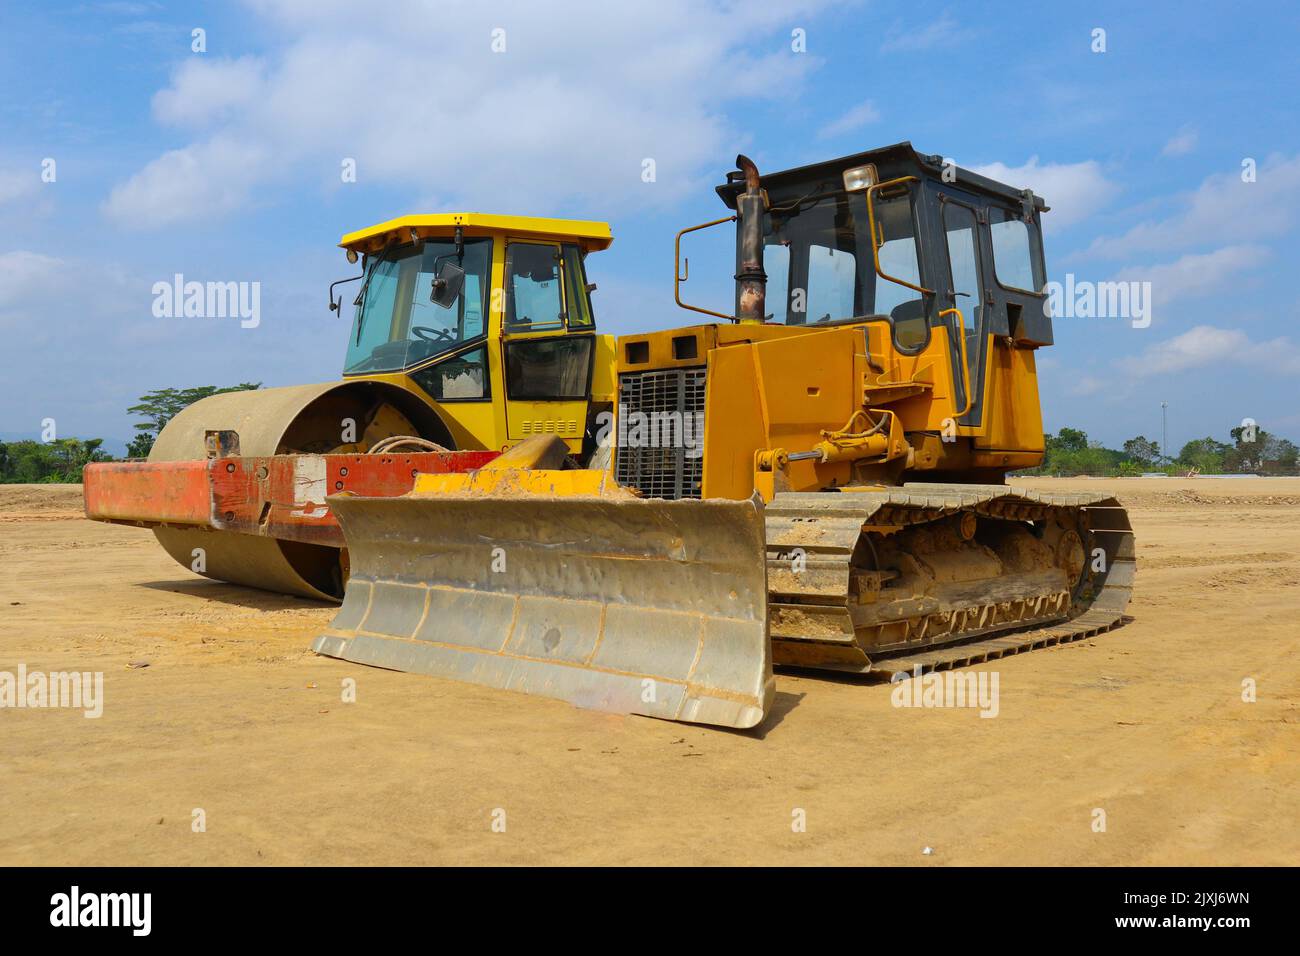 bulldozer and road roller with yellow color, on construction site and sky background Stock Photo